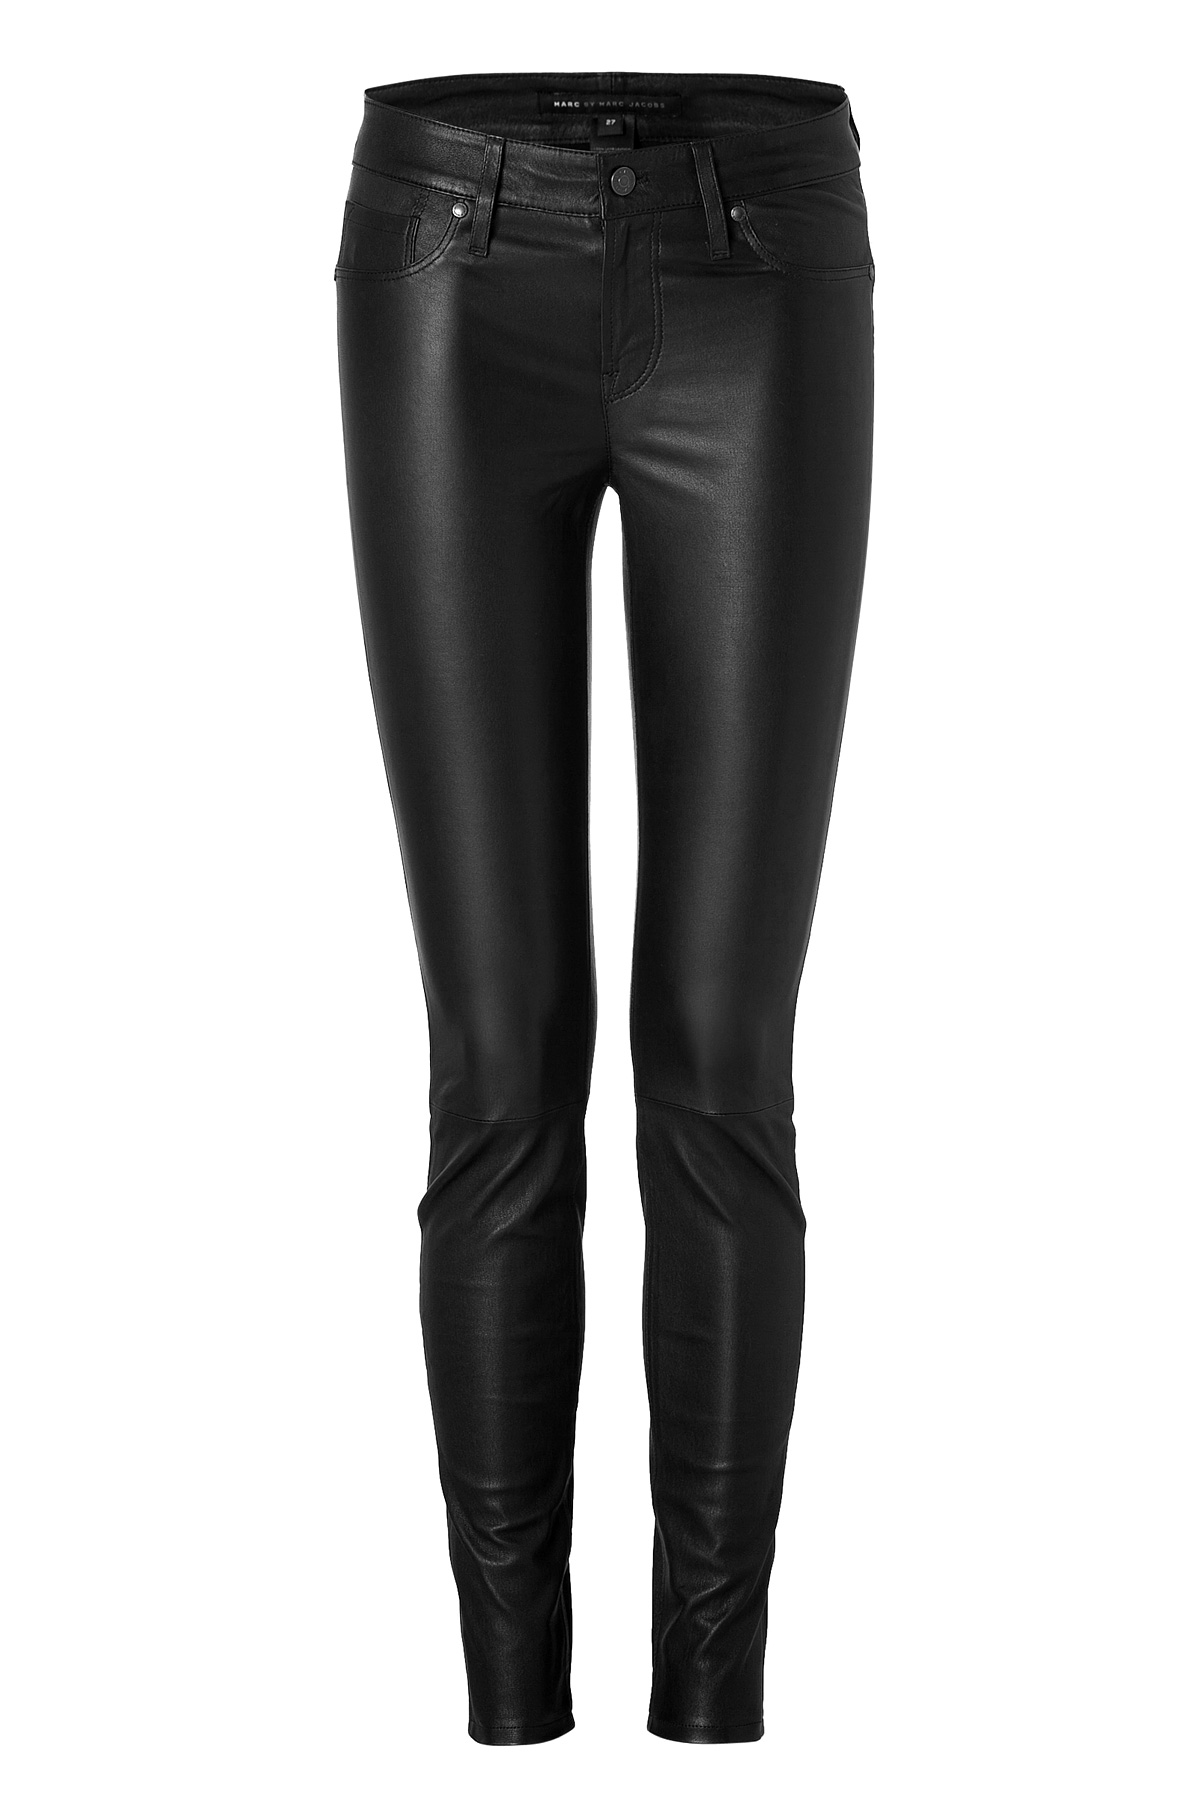 Marc by marc jacobs Leather Mirah Stick Pants in Black in Black | Lyst